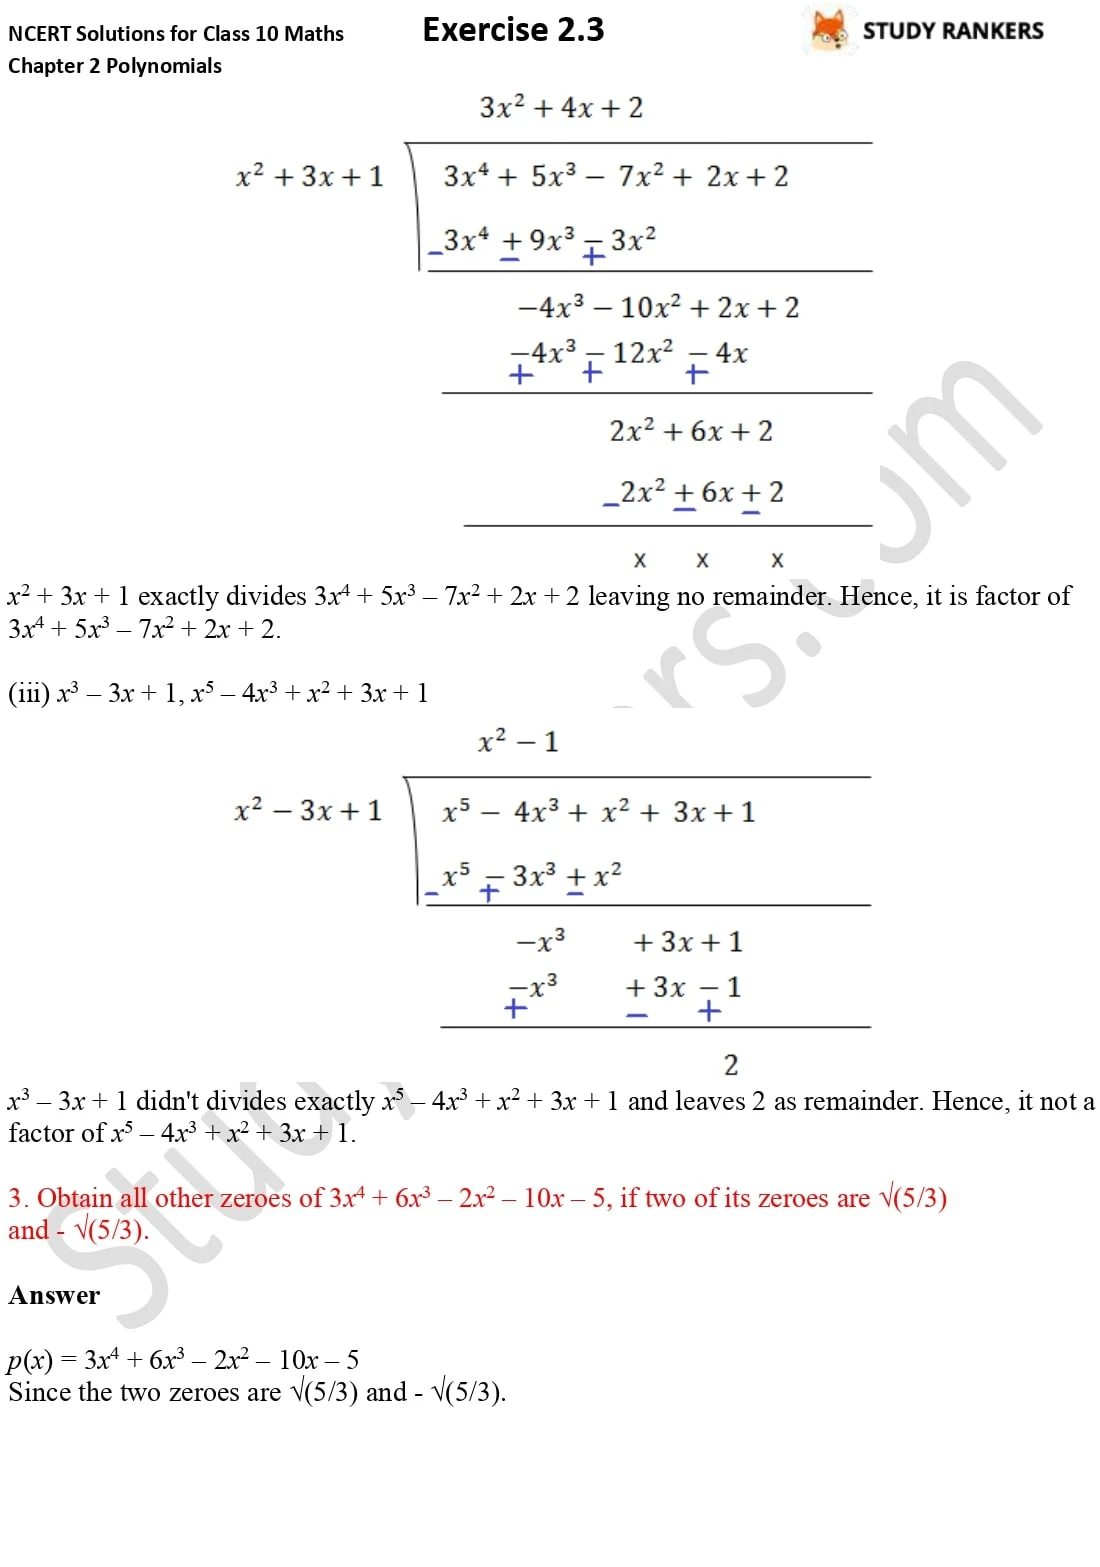 NCERT Solutions for Class 10 Maths Chapter 2 Polynomials Exercise 2.3 3